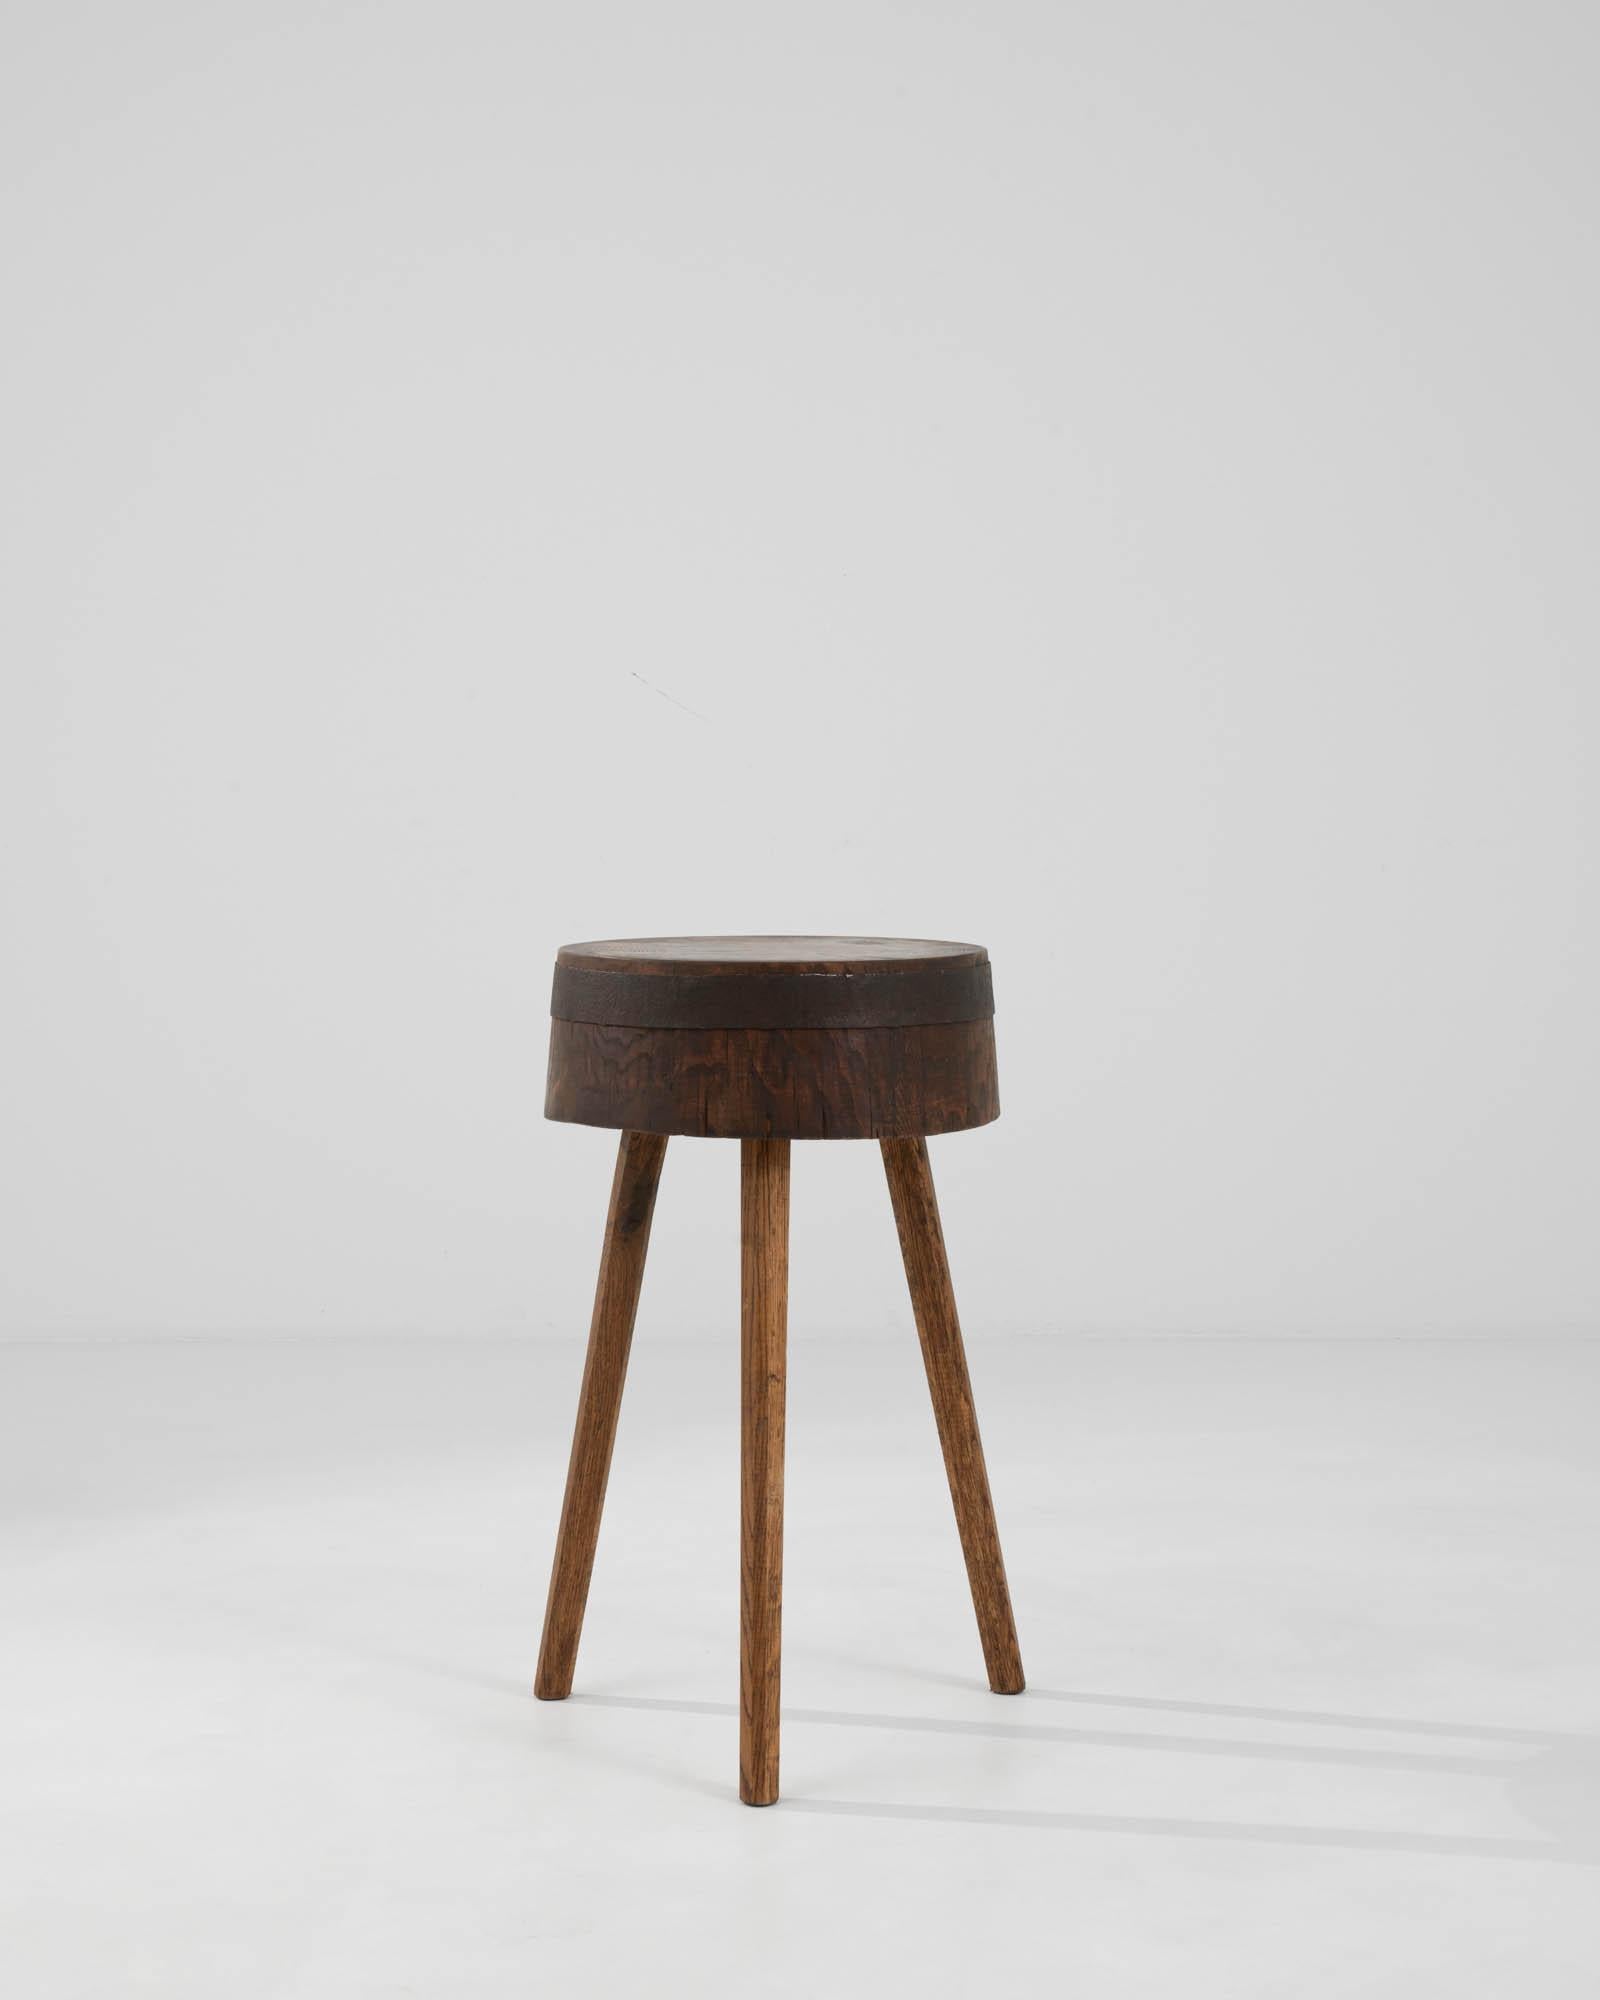 This 20th Century French Wooden Side Table exudes timeless elegance and understated sophistication. Its smooth, round top showcases the rich, deep hues of well-aged wood, bearing the gentle hallmarks of history in its subtle grain patterns and warm